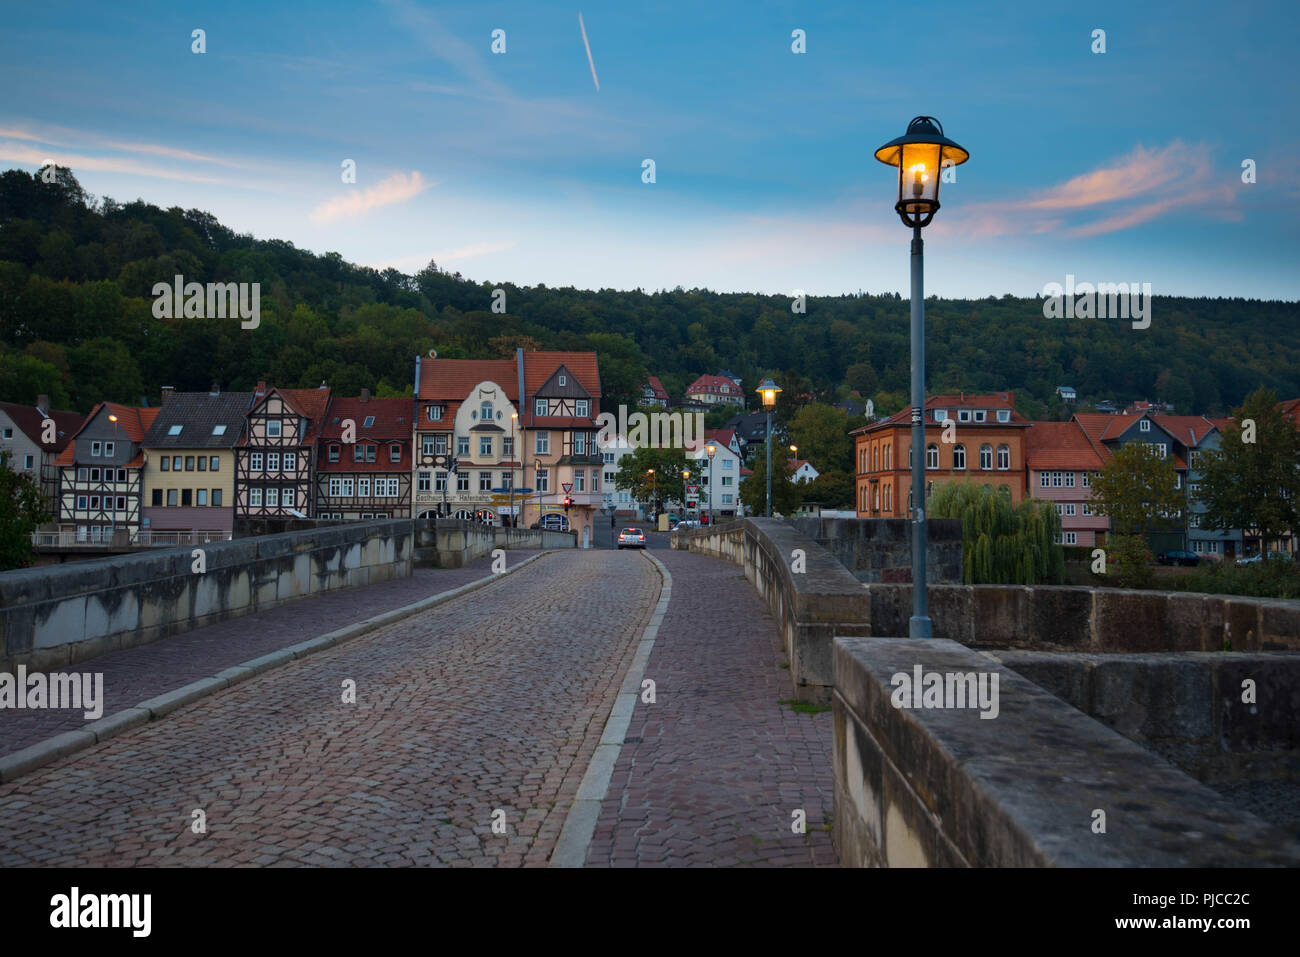 Picturesque little city of Hannoversch Münden in Germany Stock Photo